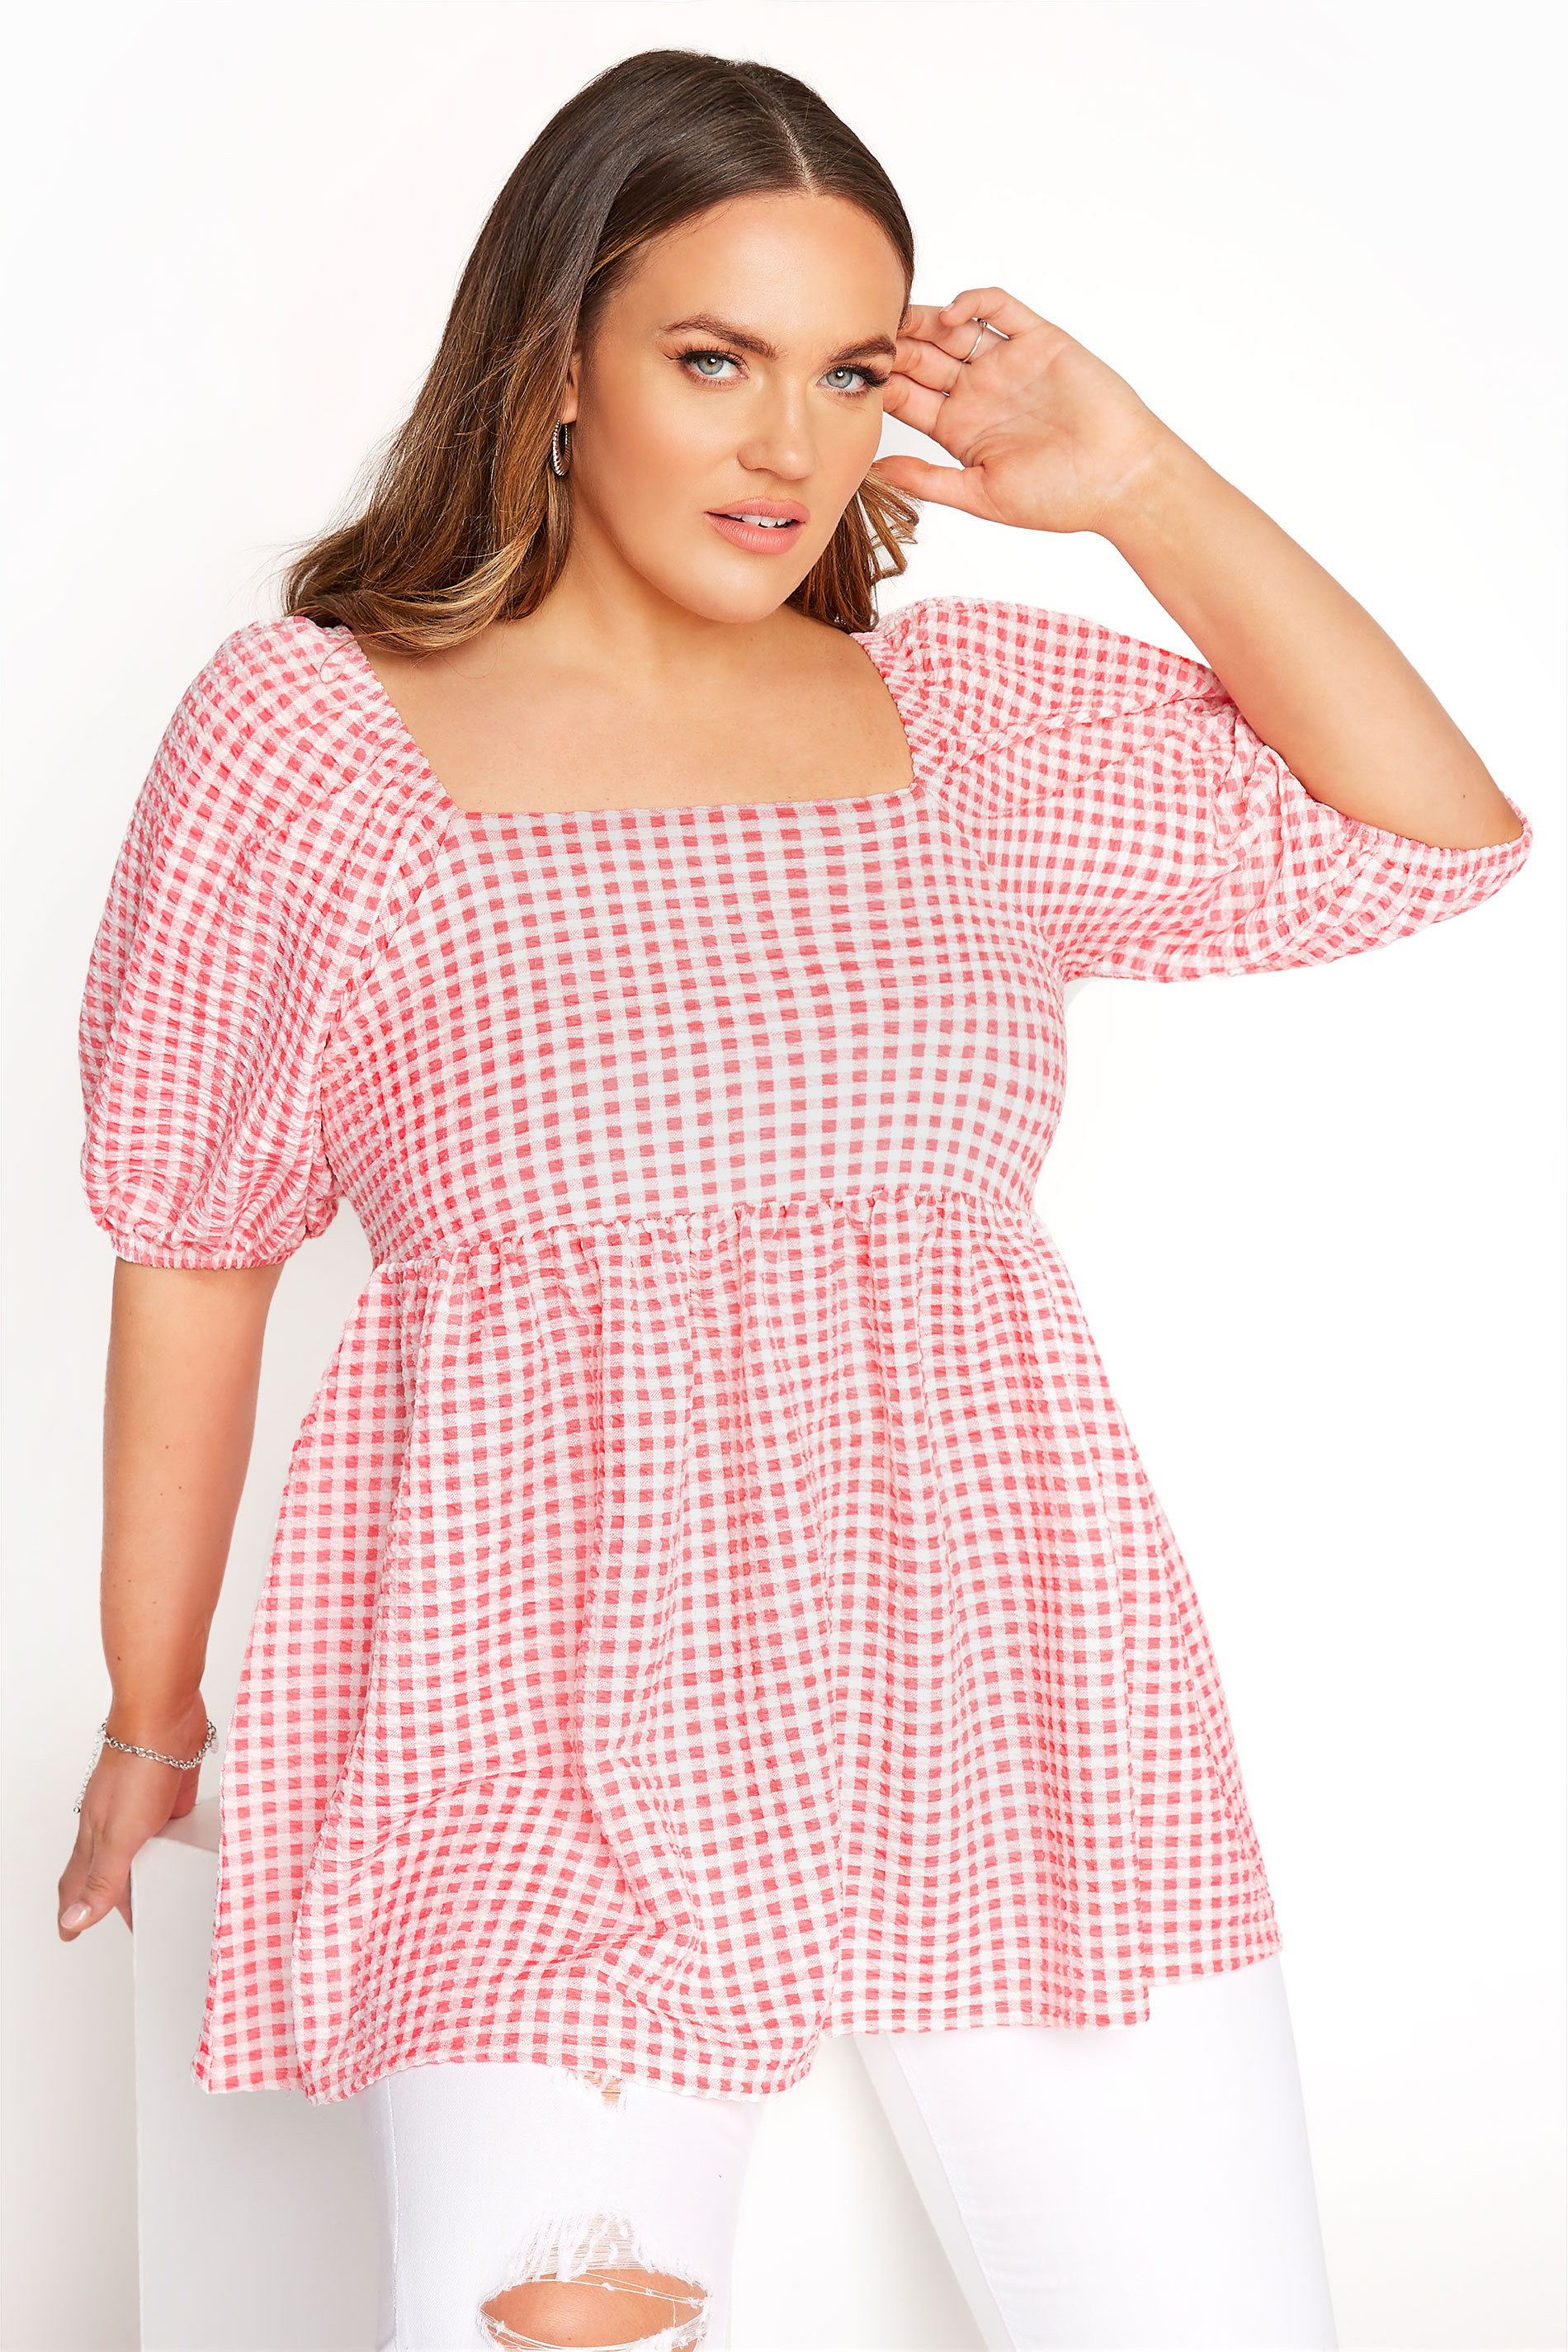 LIMITED COLLECTION Curve Coral Pink Gingham Milkmaid Top_A.jpg